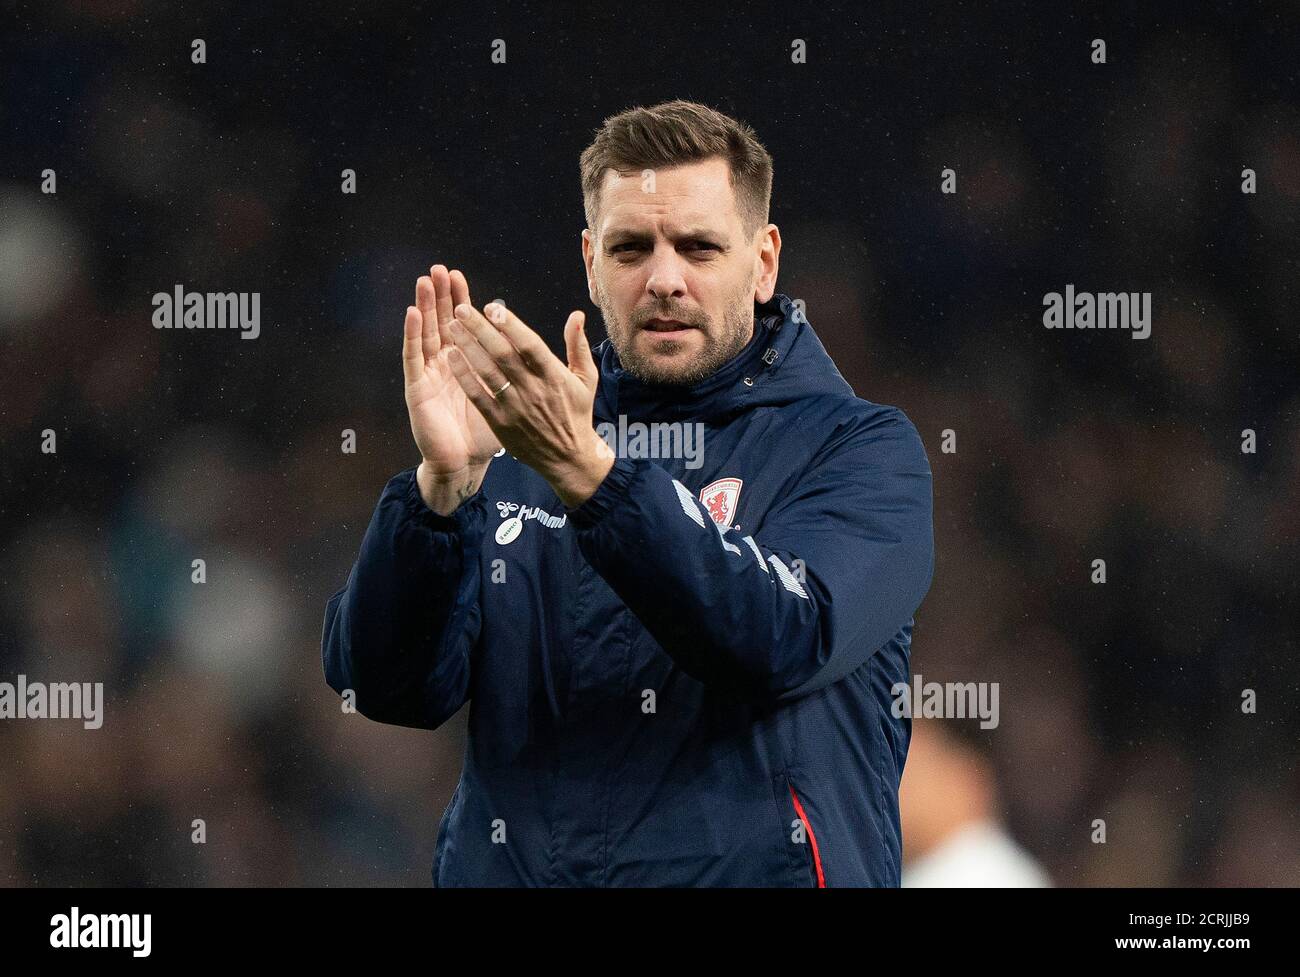 Jonathan Woodgate, direttore di Middlesbrough. Spurs e Middlesbrough. FA CUP ROUND 3 PHOTO CREDIT : © MARK PAIN / ALAMY STOCK PHOTO Foto Stock